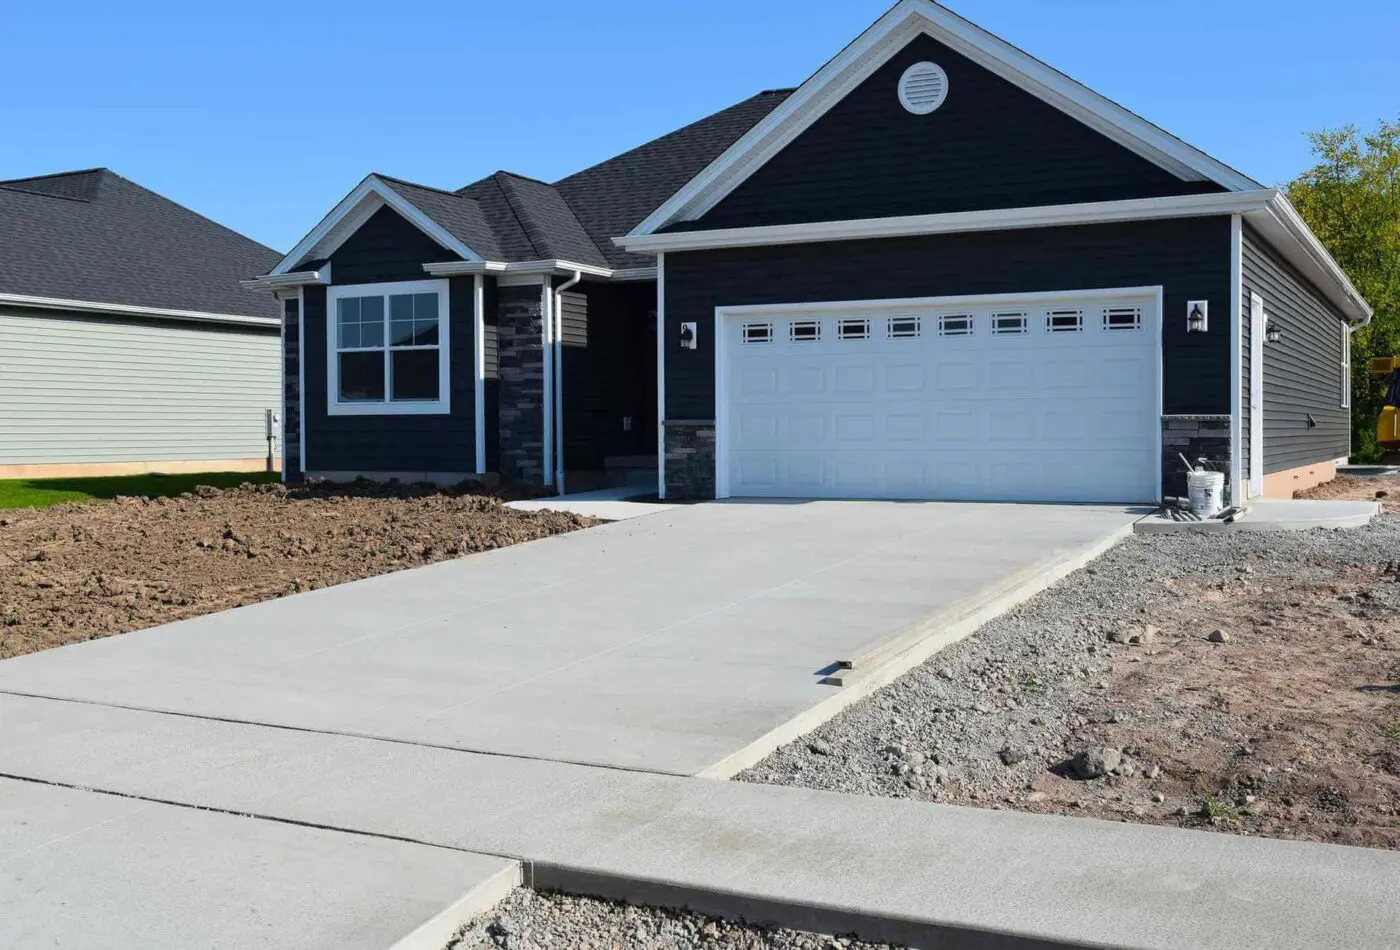 A newly built modern house with dark gray siding and a white garage door. The concrete driveway and sidewalk, thanks to Reno Concrete Solutions, are freshly laid, contrasting the bare dirt yard where landscaping is yet to be done. Under the clear blue sky of Genoa NV, this home awaits its finishing touches.